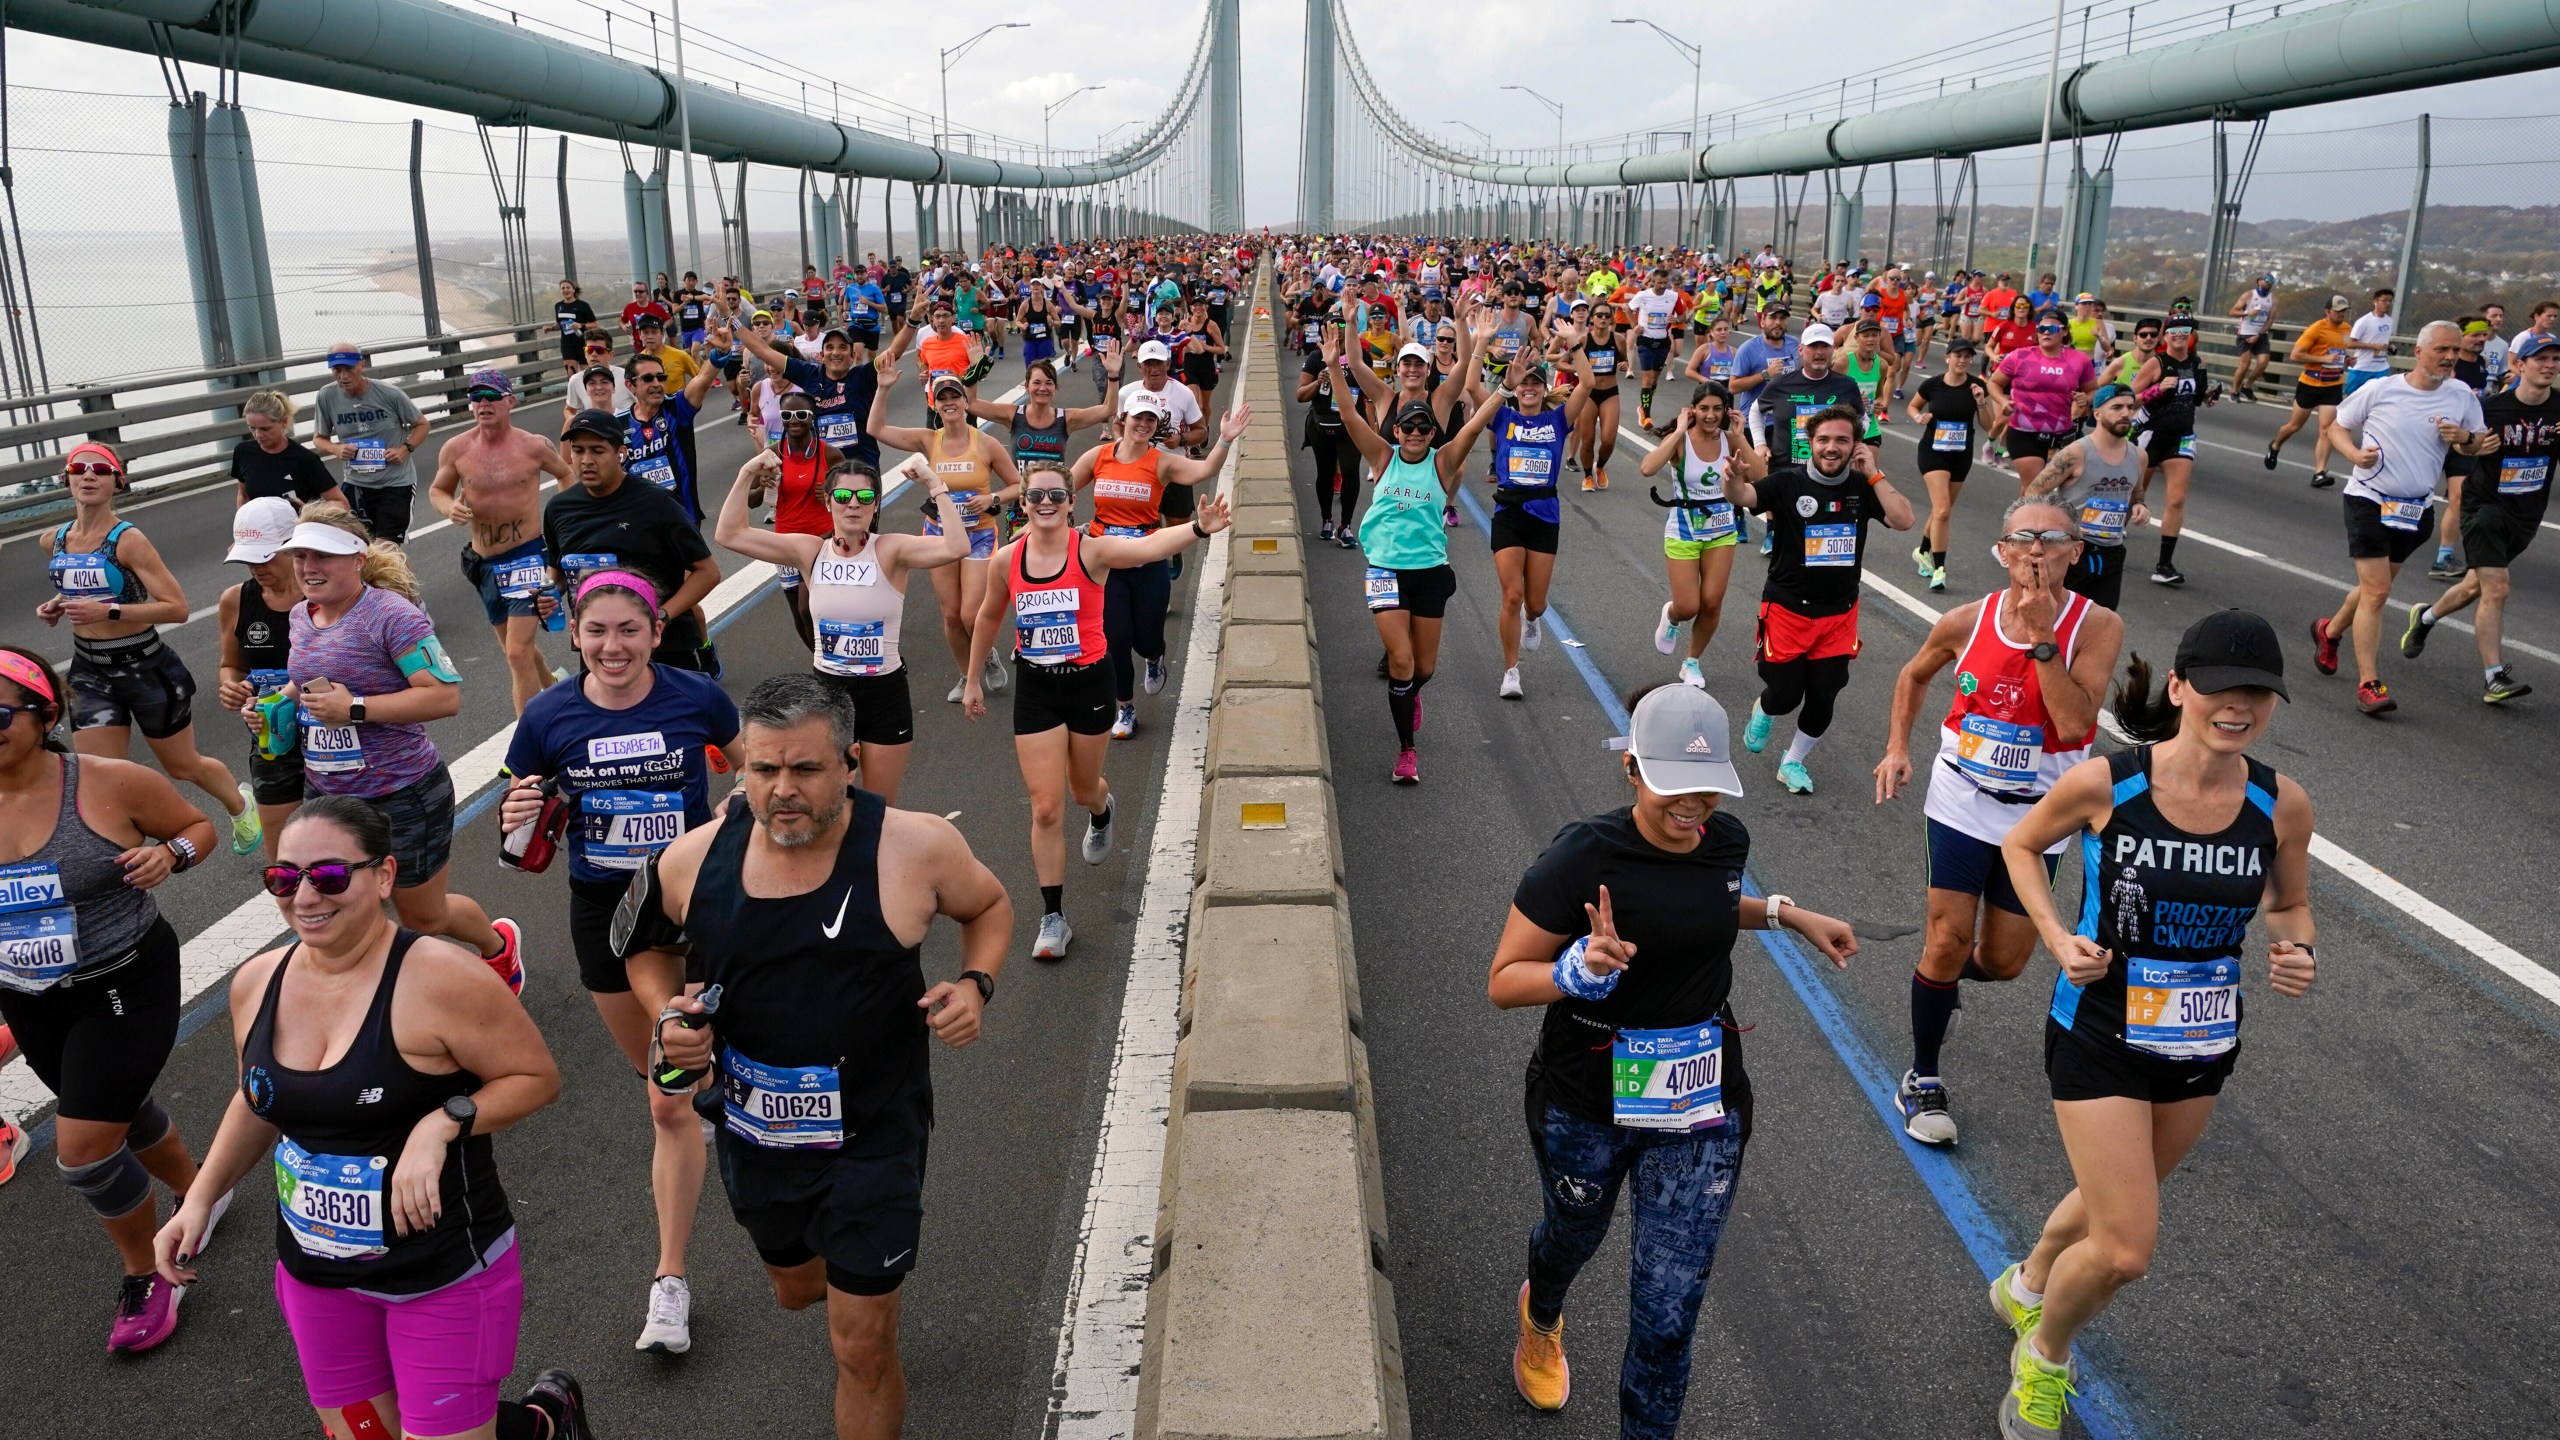 FILE - Runners cross the Verrazzano-Narrows Bridge at the start of the New York City Marathon in New York, Sunday, Nov. 6, 2022. The New York City Marathon organizers will soon have to pay a toll to cross a state bridge, just like every other commuter, if transit officials in New York have their way. The Metropolitan Transportation Authority is demanding the New York Road Runners, organizers of the venerable race held the first Sunday each November, to pay roughly $750,000 for use of the Verrazzano-Narrows Bridge. (AP Photo/Seth Wenig, File)